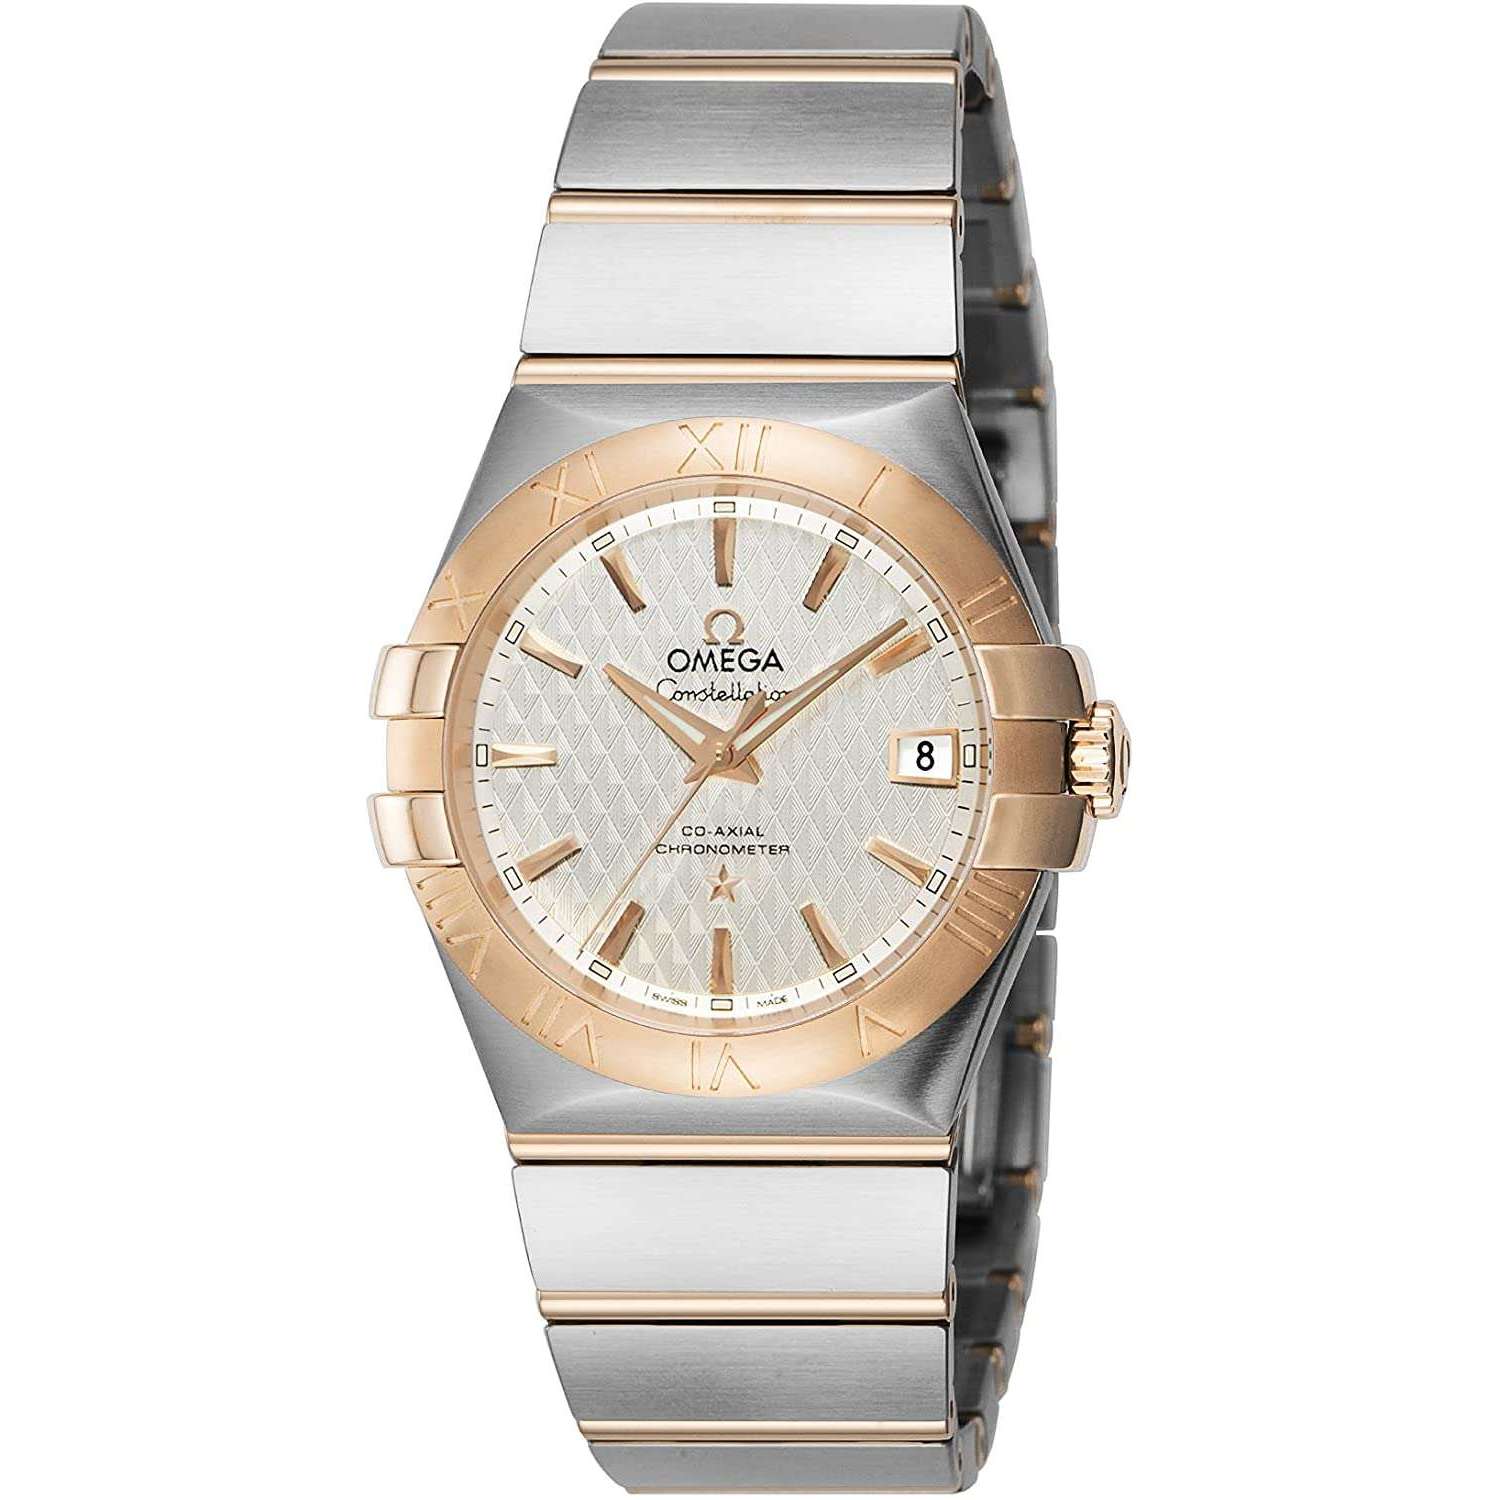 ROOK JAPAN:OMEGA CONSTELLATION CO-AXIAL CHRONOMETER 35 MM MEN WATCH 123.20.35.20.02.005,Luxury Watch,Omega